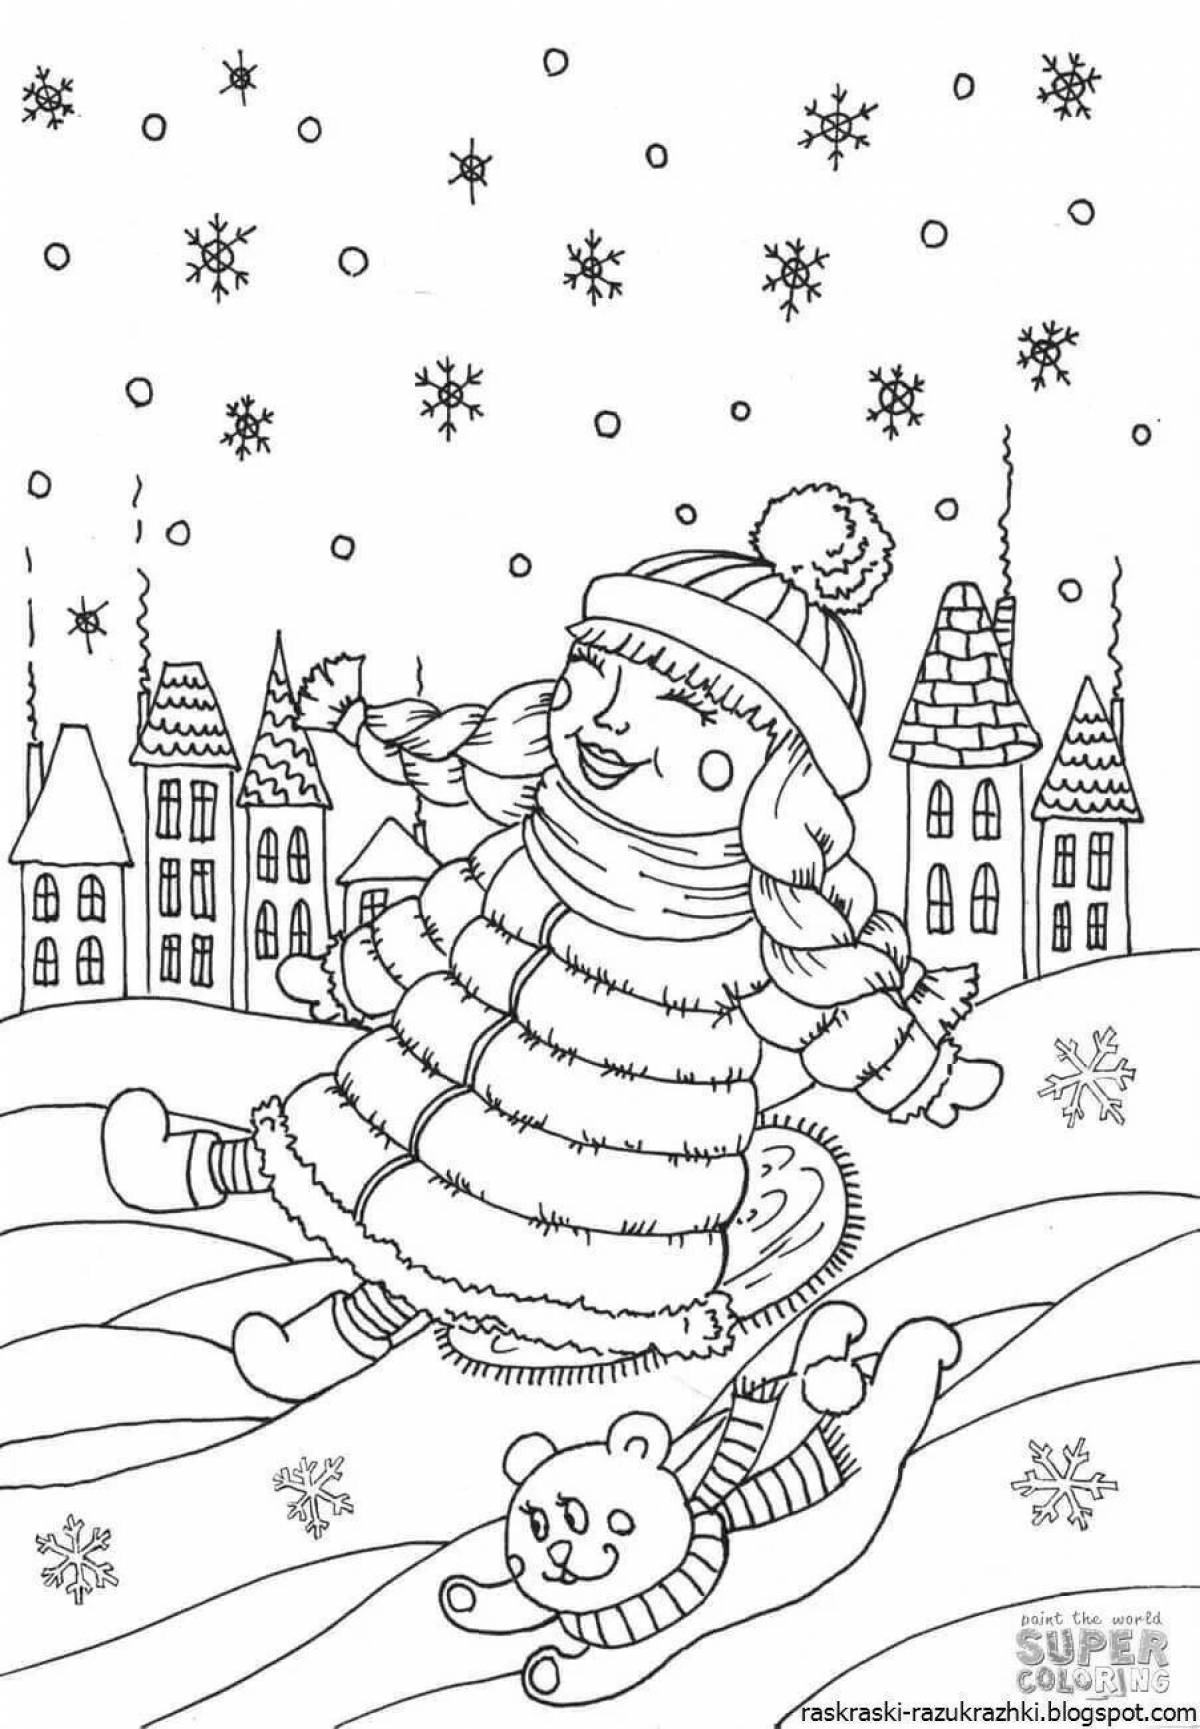 Colorful january coloring book for kids